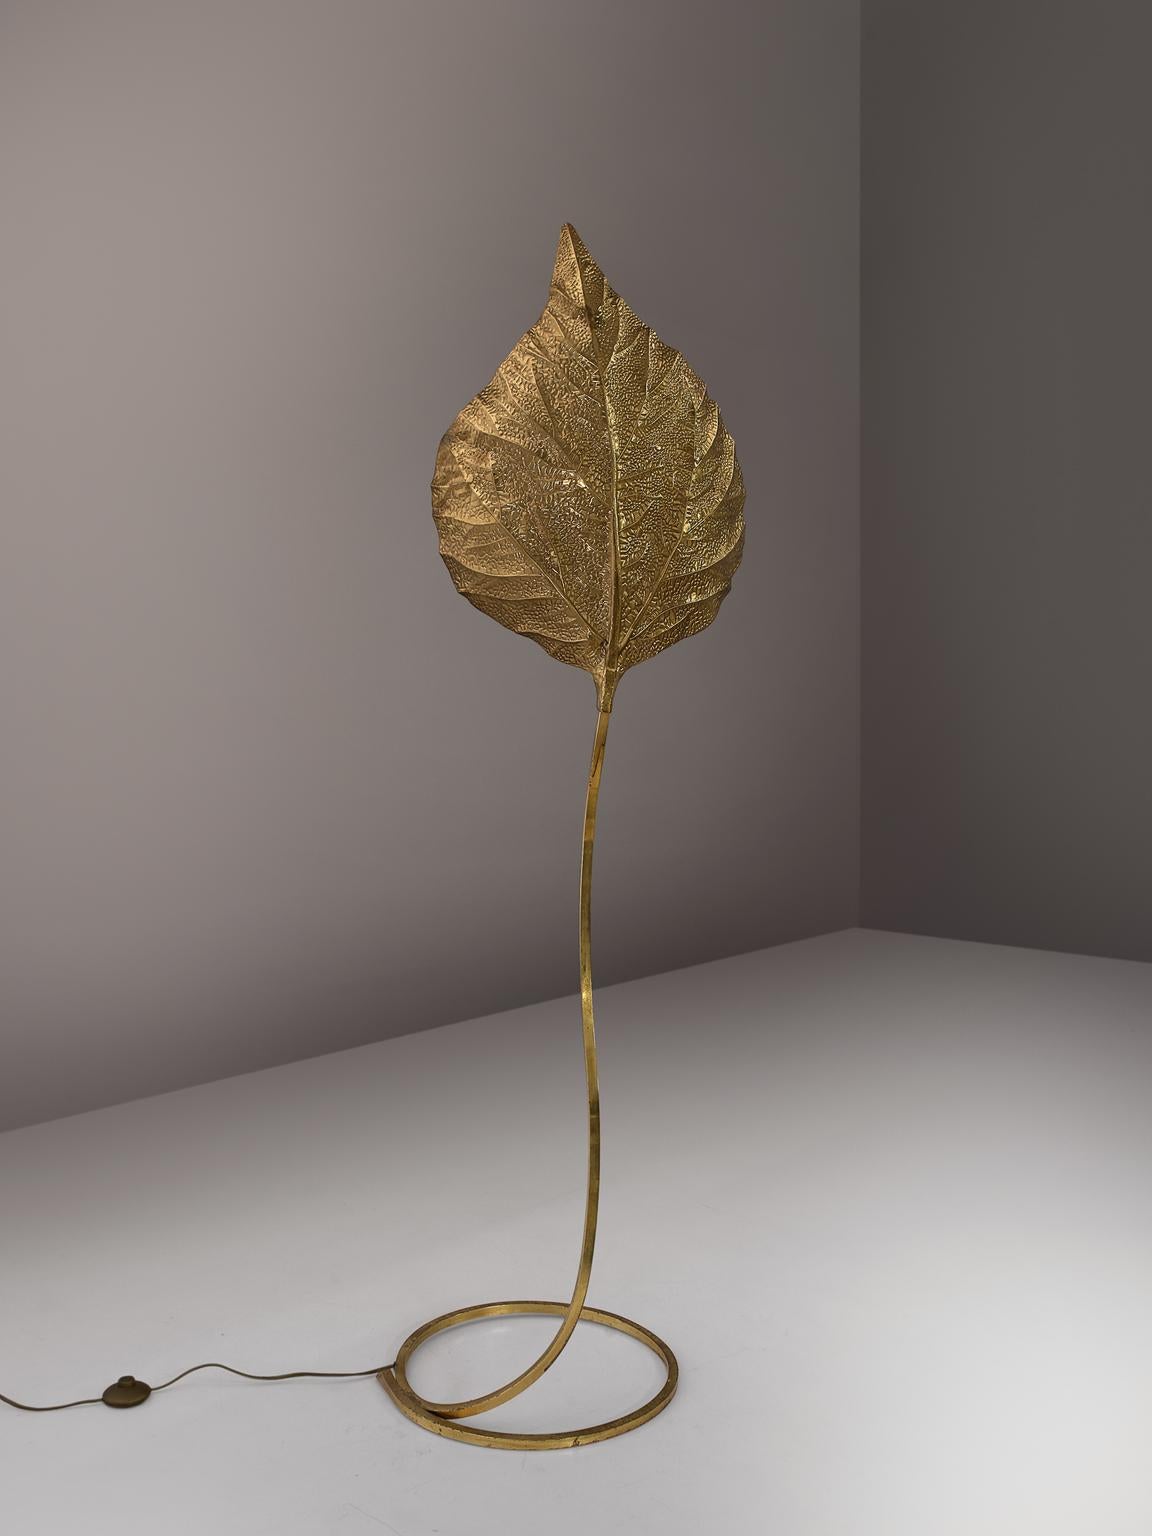 Carlo Giorgi for Bottega Gadda, brass 'Rhubarb' leaf floor lamp, Italy, 1970s.

This large single leaf floor lamp is by Carlo Giorgi is produced in Italy in the 1970s. This biomorphic, hand-hammered brass floor lamp resembles a large rhubarb